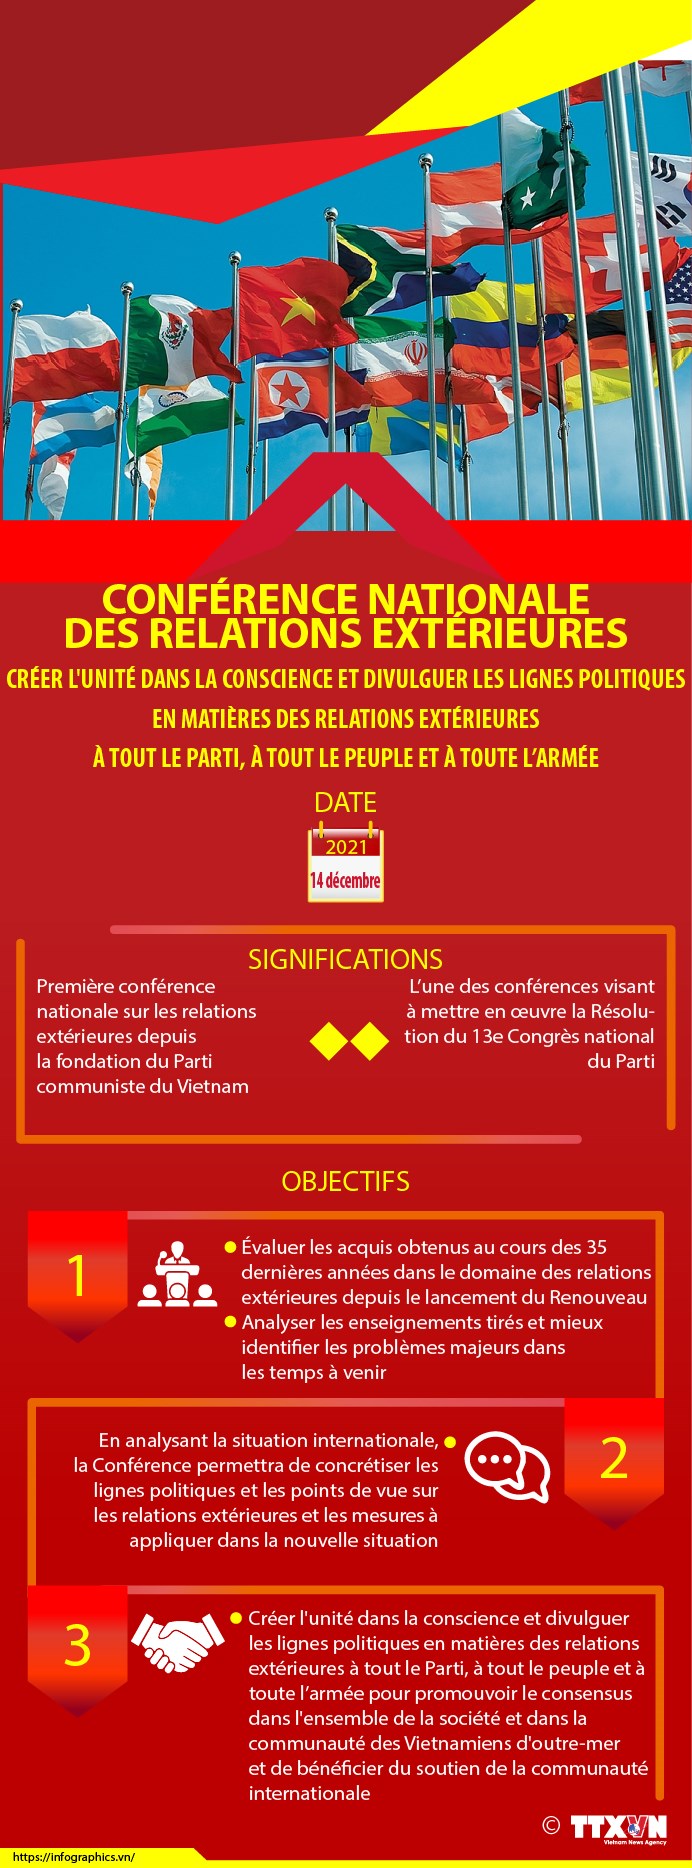 Premiere Conference nationale des relations exterieures hinh anh 1